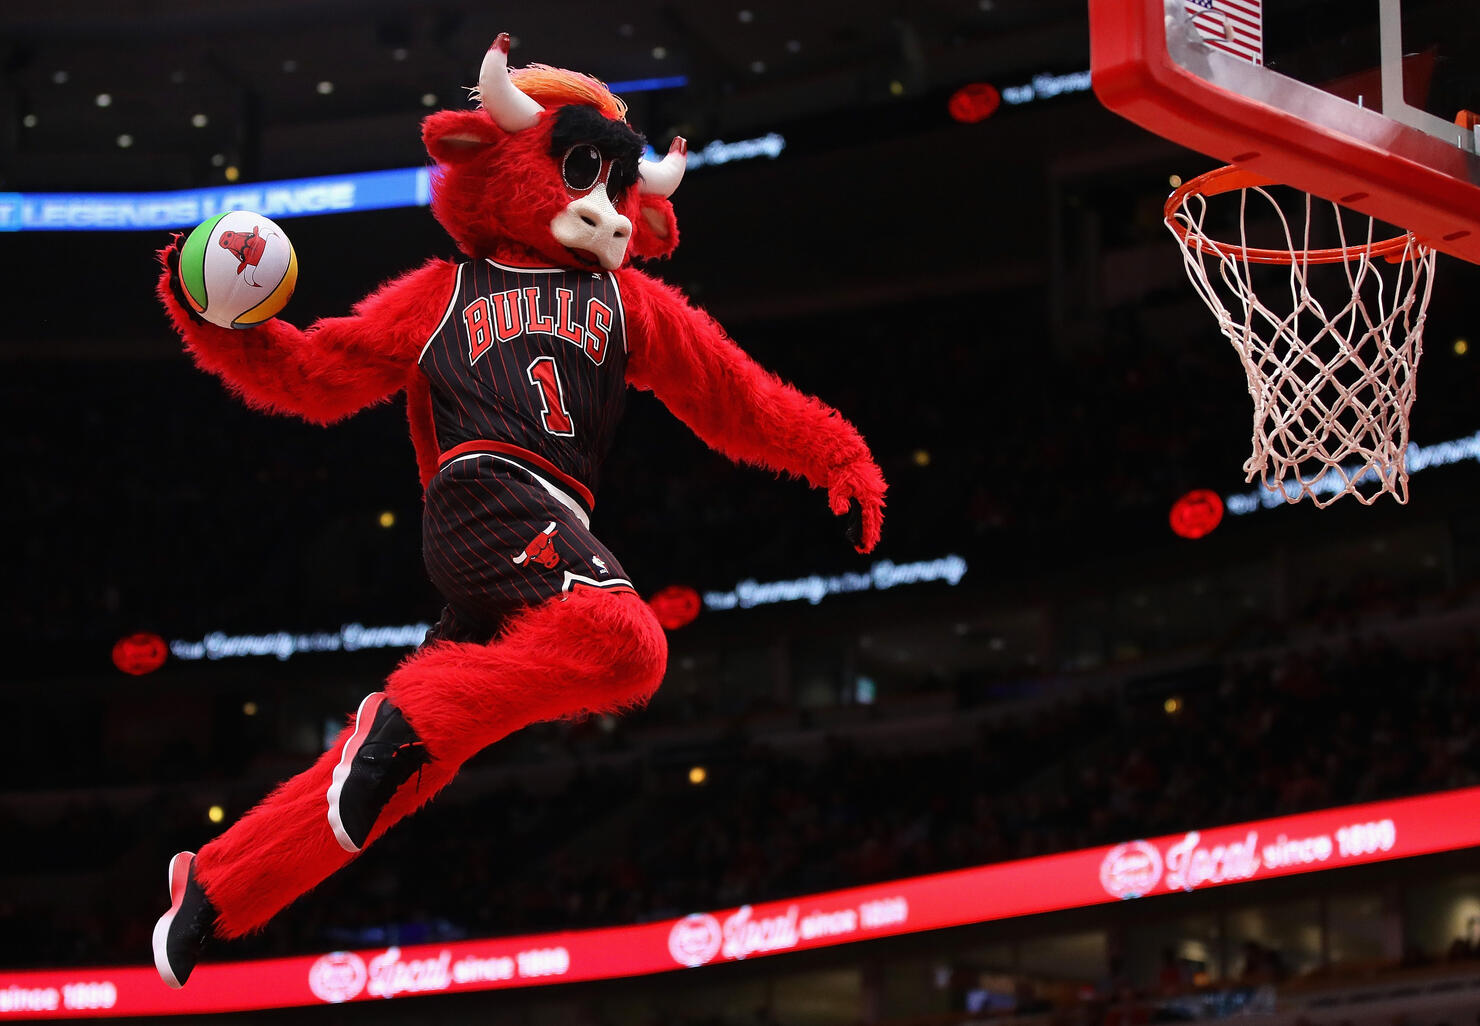 LOOK: NBA mascots dunking. That's all